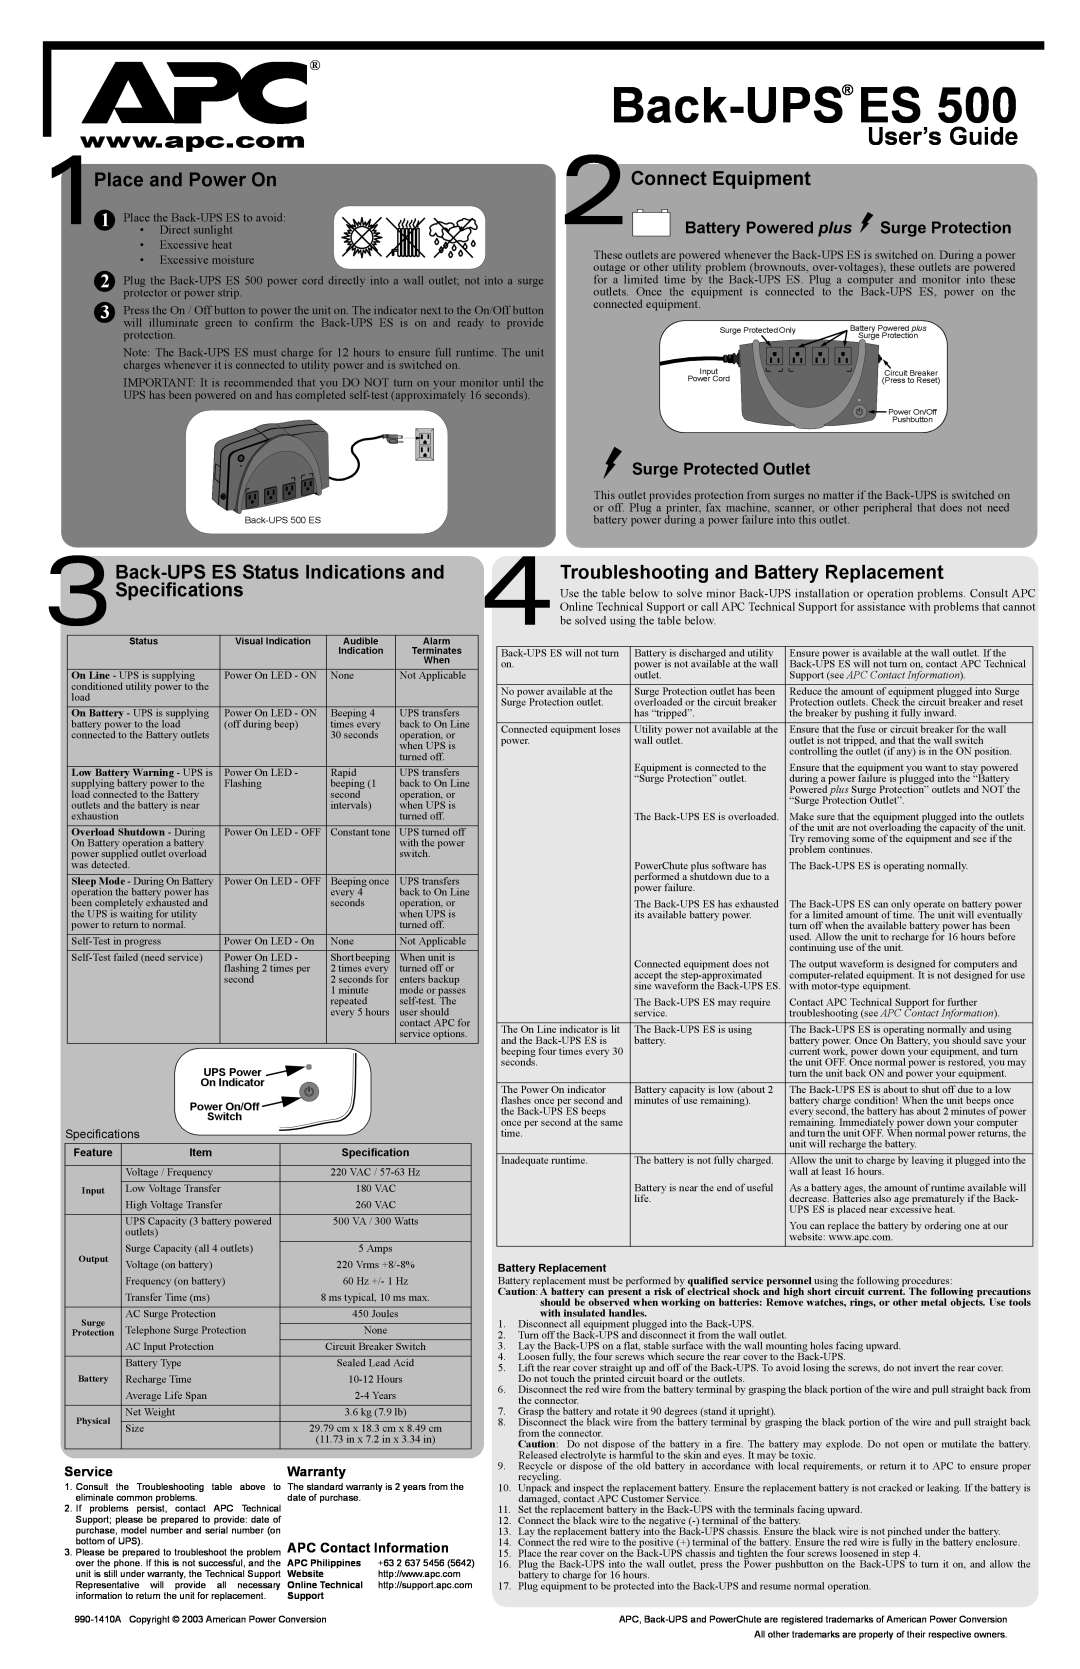 American Power Conversion ES 500 specifications Back-UPS ES, User’s Guide, 2Connect Equipment, Specifications, Service 